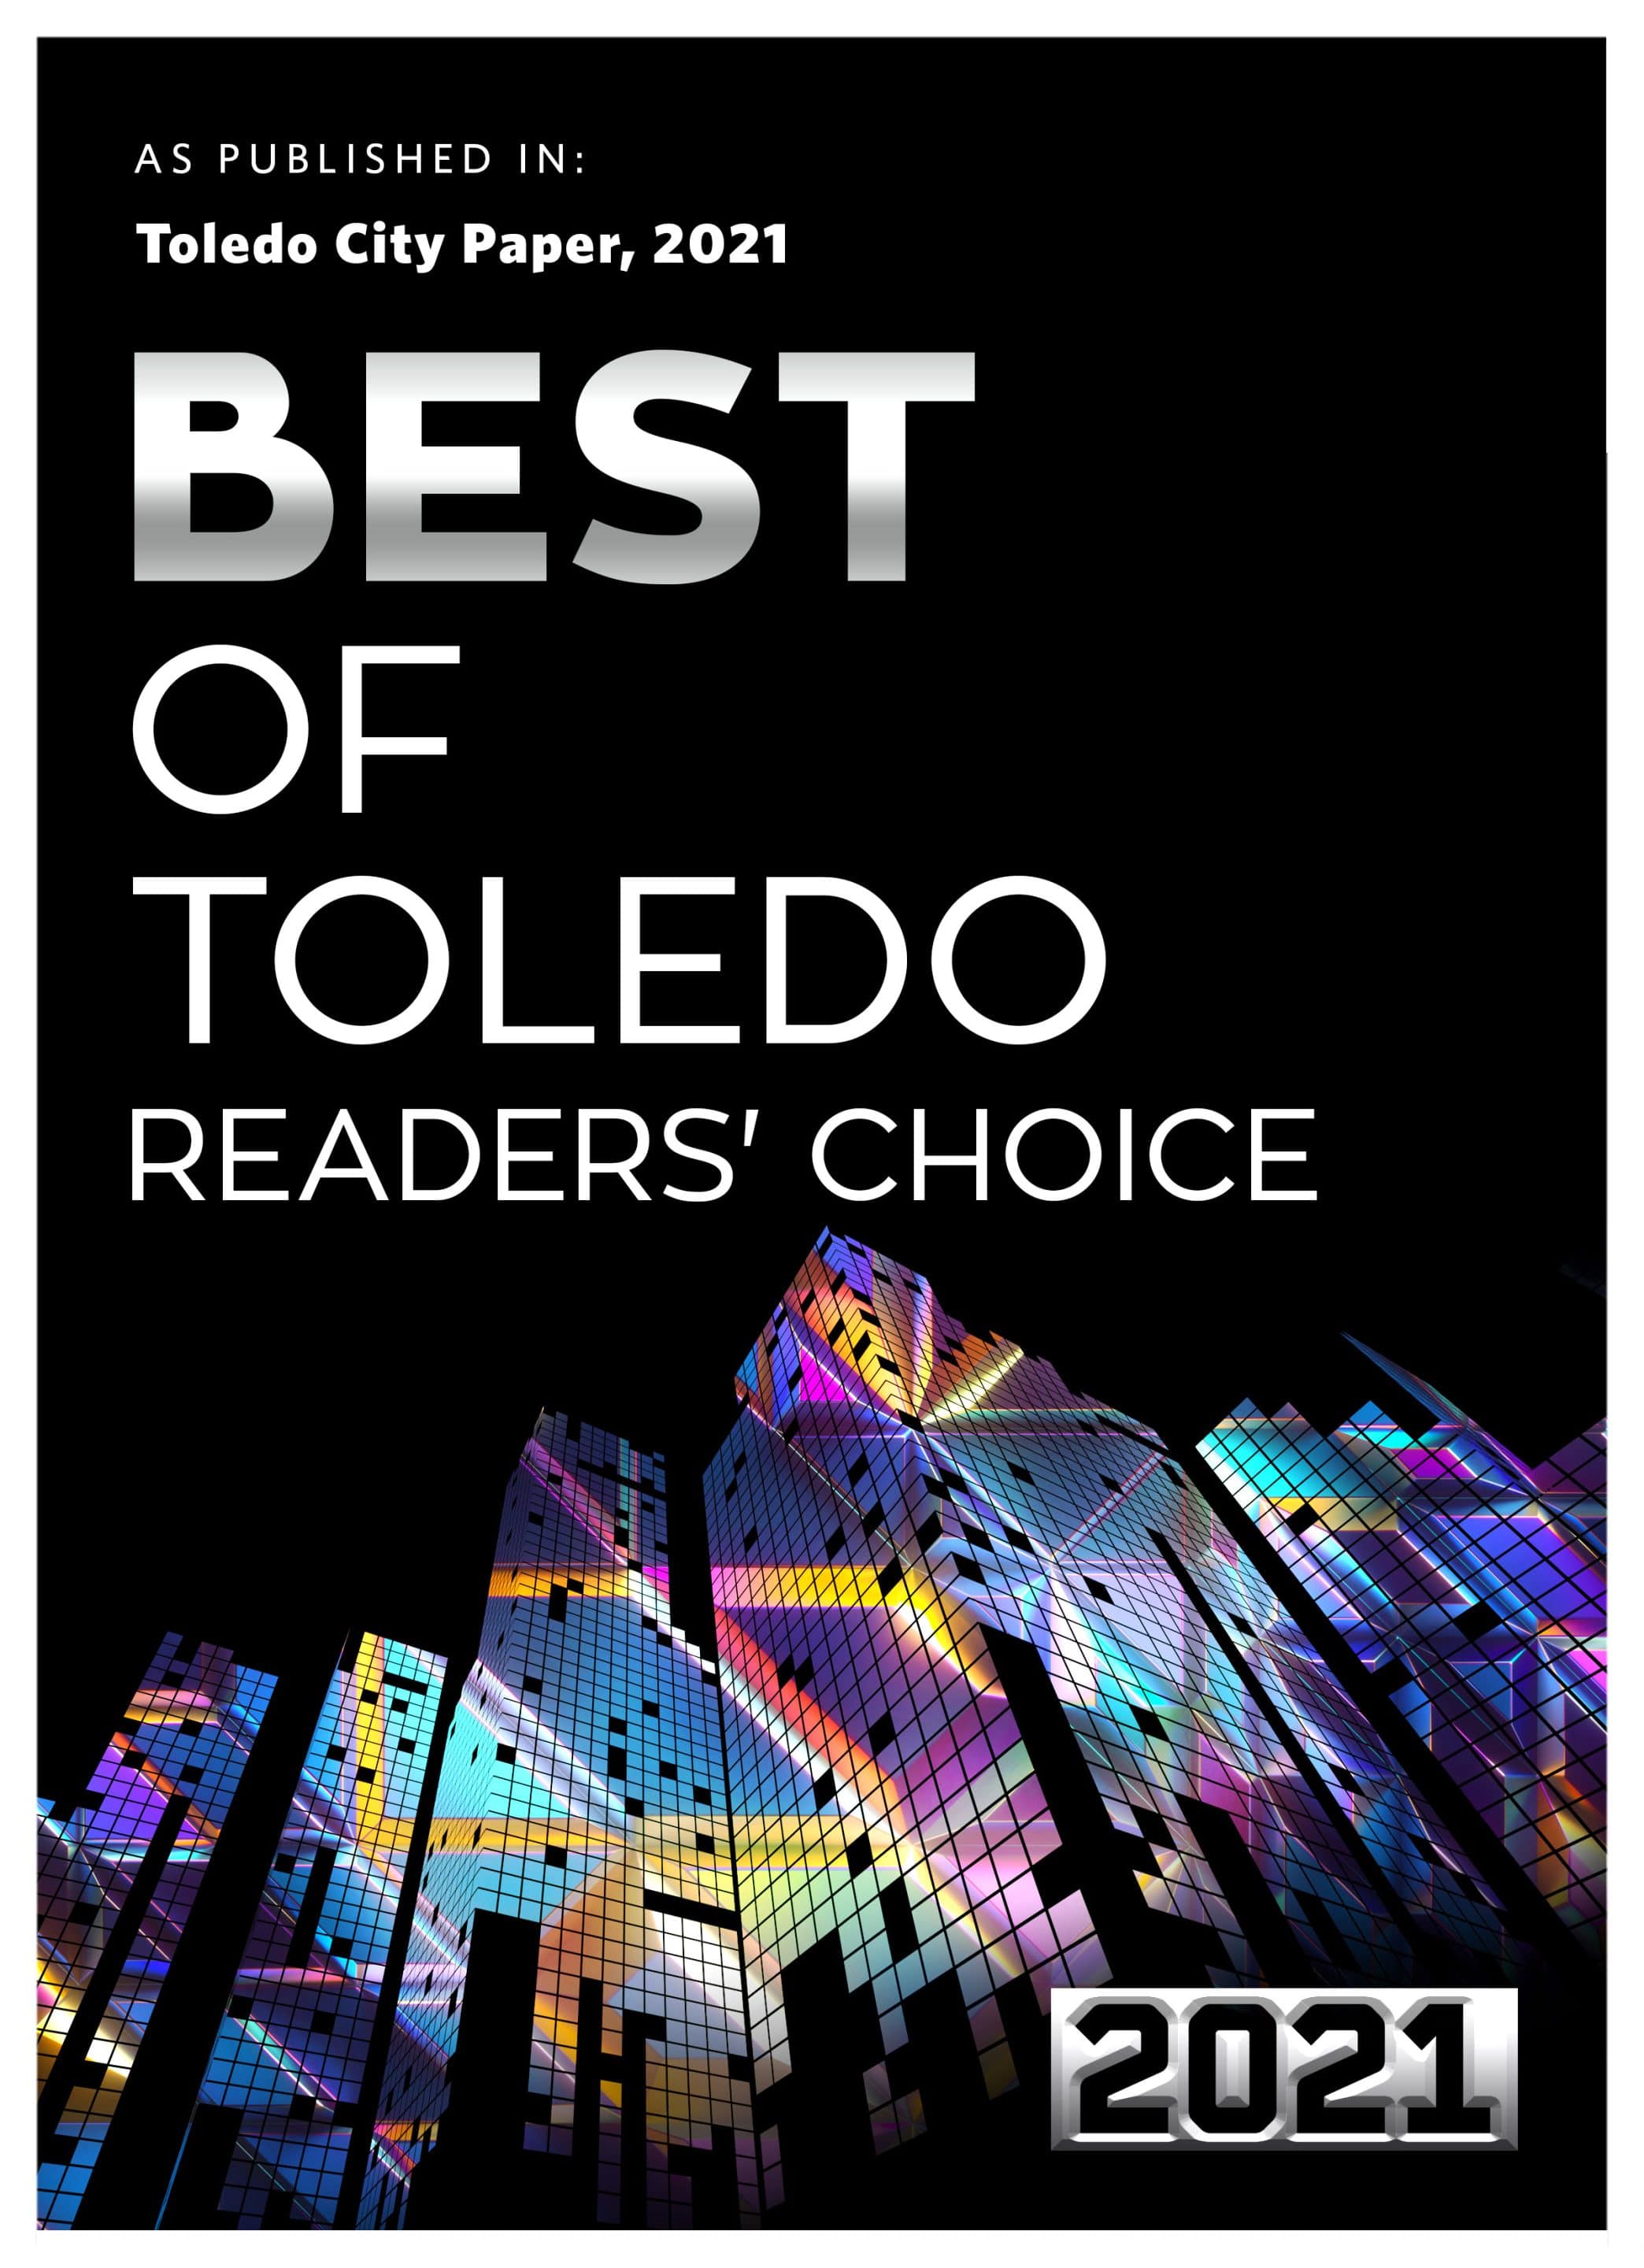 believe dental care was 2021 best dental clinic of toledo reader choice award graphic